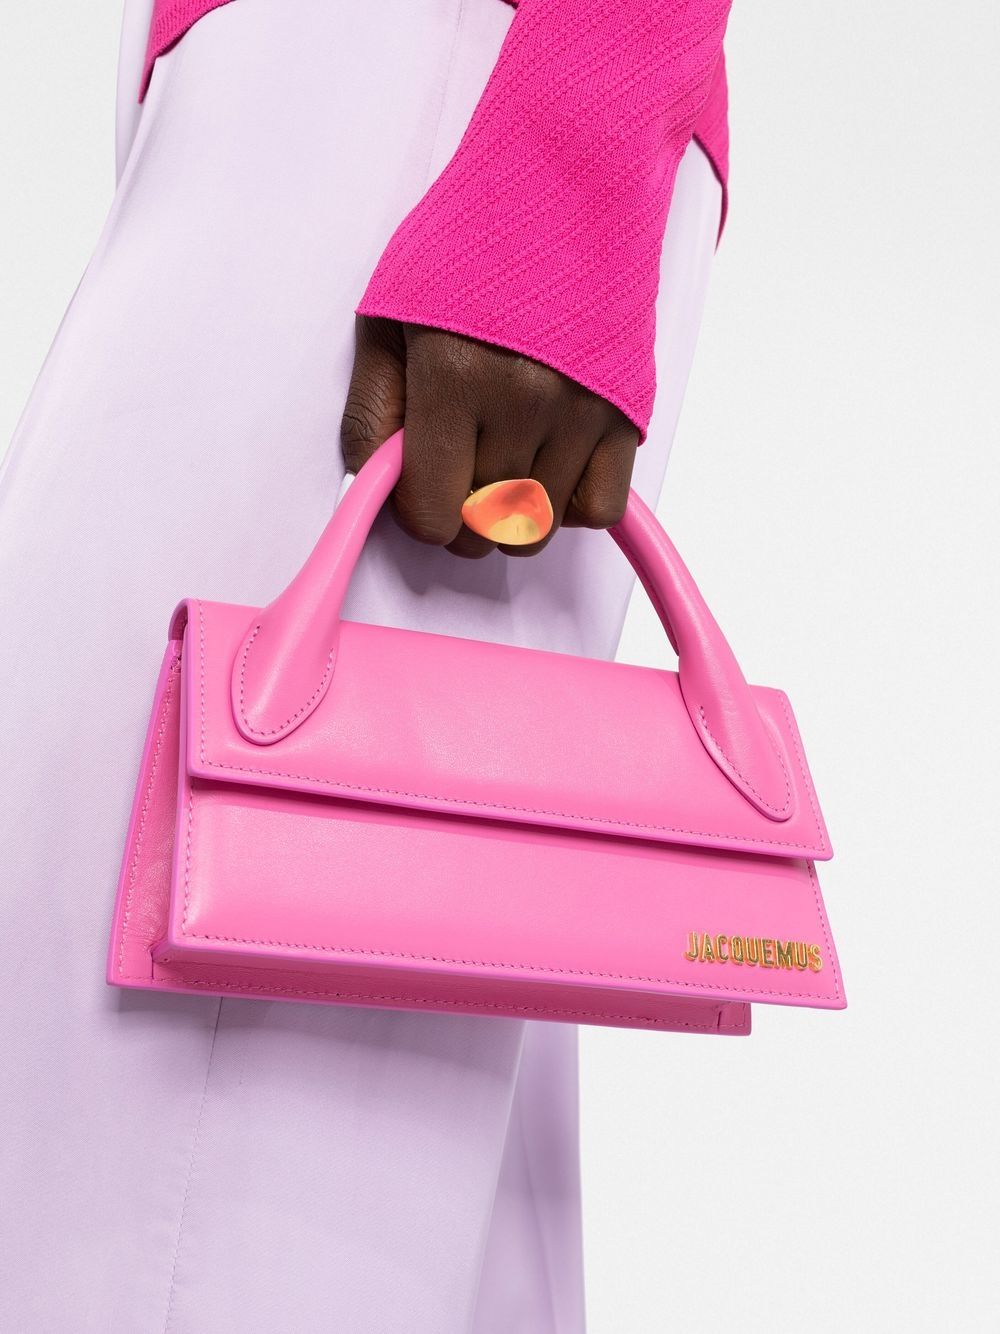 Jacquemus Le Chiquito Long Tote Bag In Pink | ModeSens